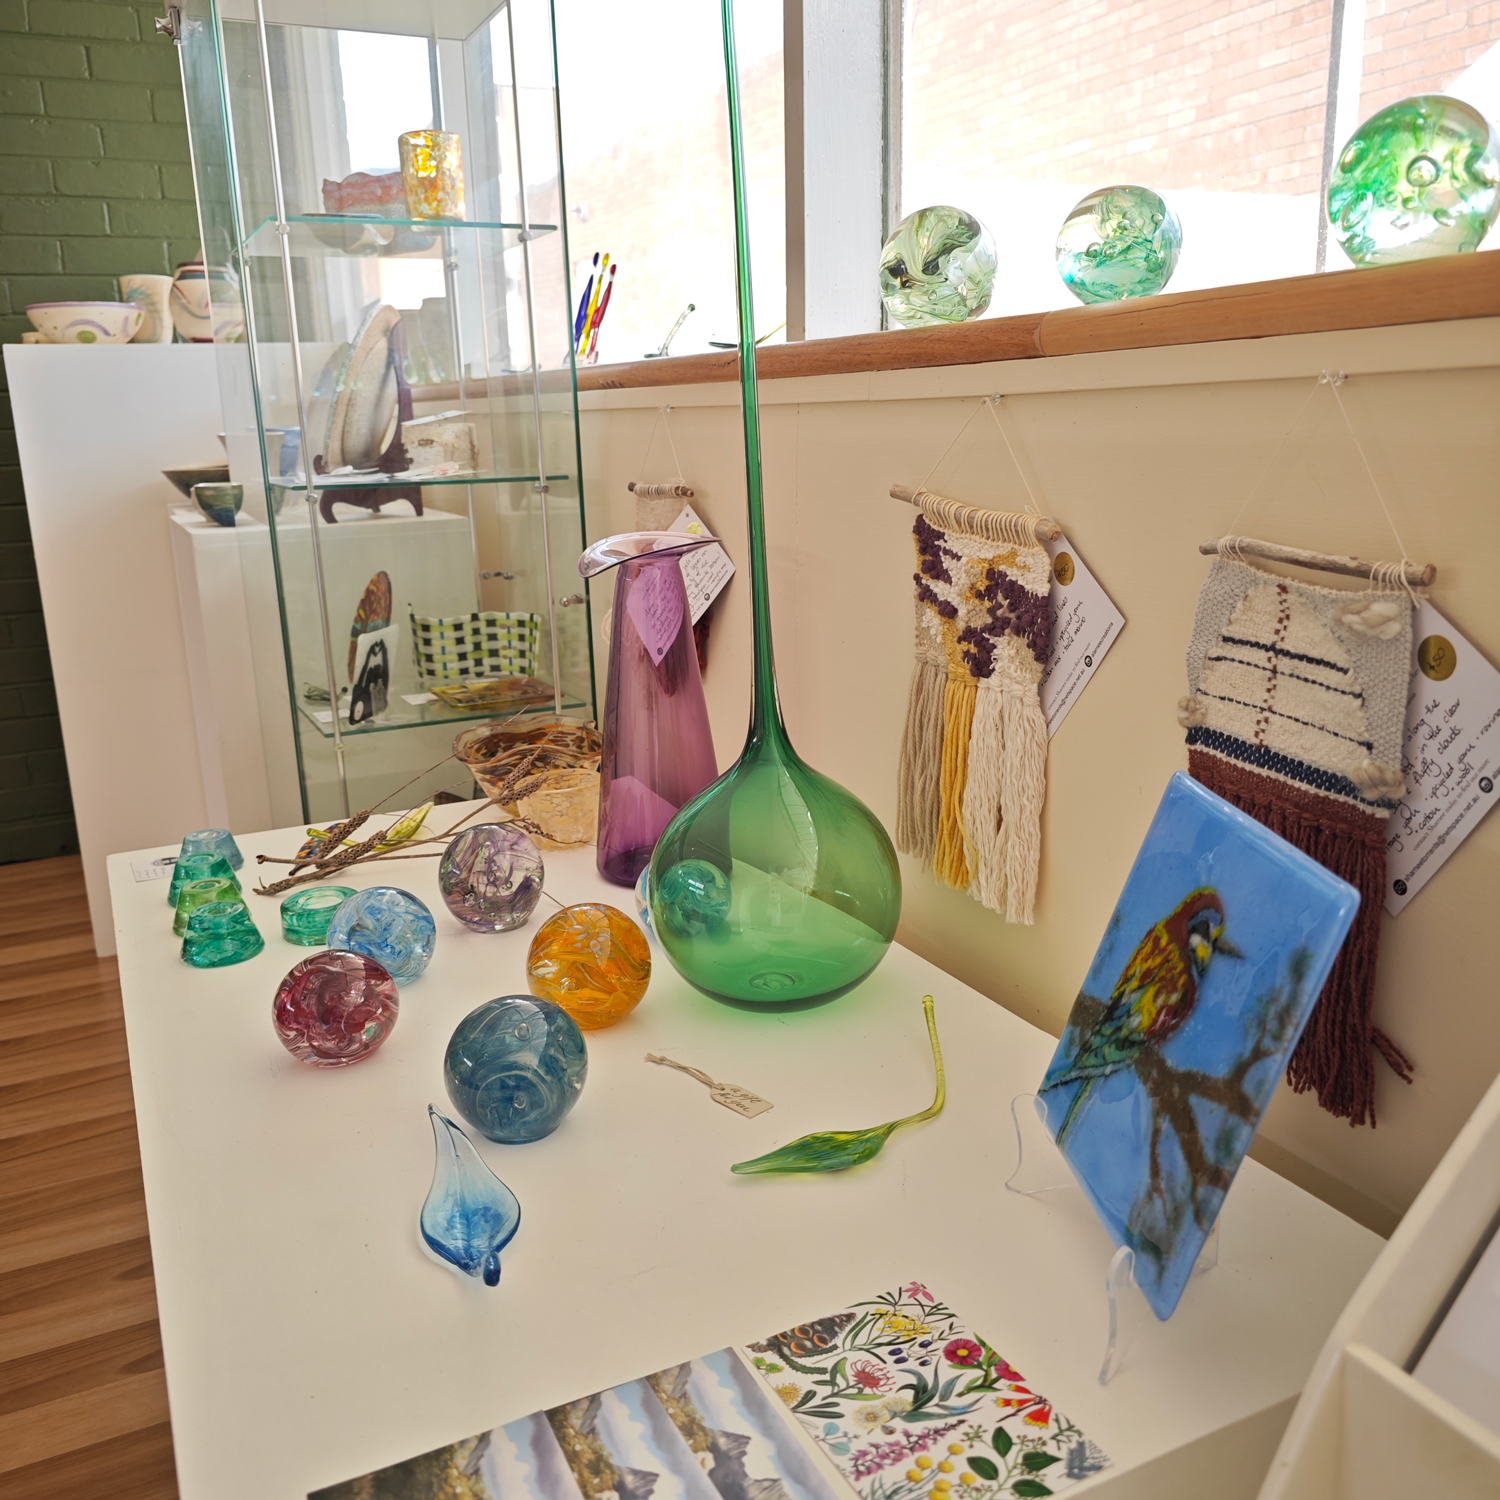 Image show the inside of the Poatina art gallery shop as part of their story Exhibition news The Inspiring Poatina Tree Art Gallery Winter Exhibitions Art Trails Tasmania as part of their Artists Ensemble membership